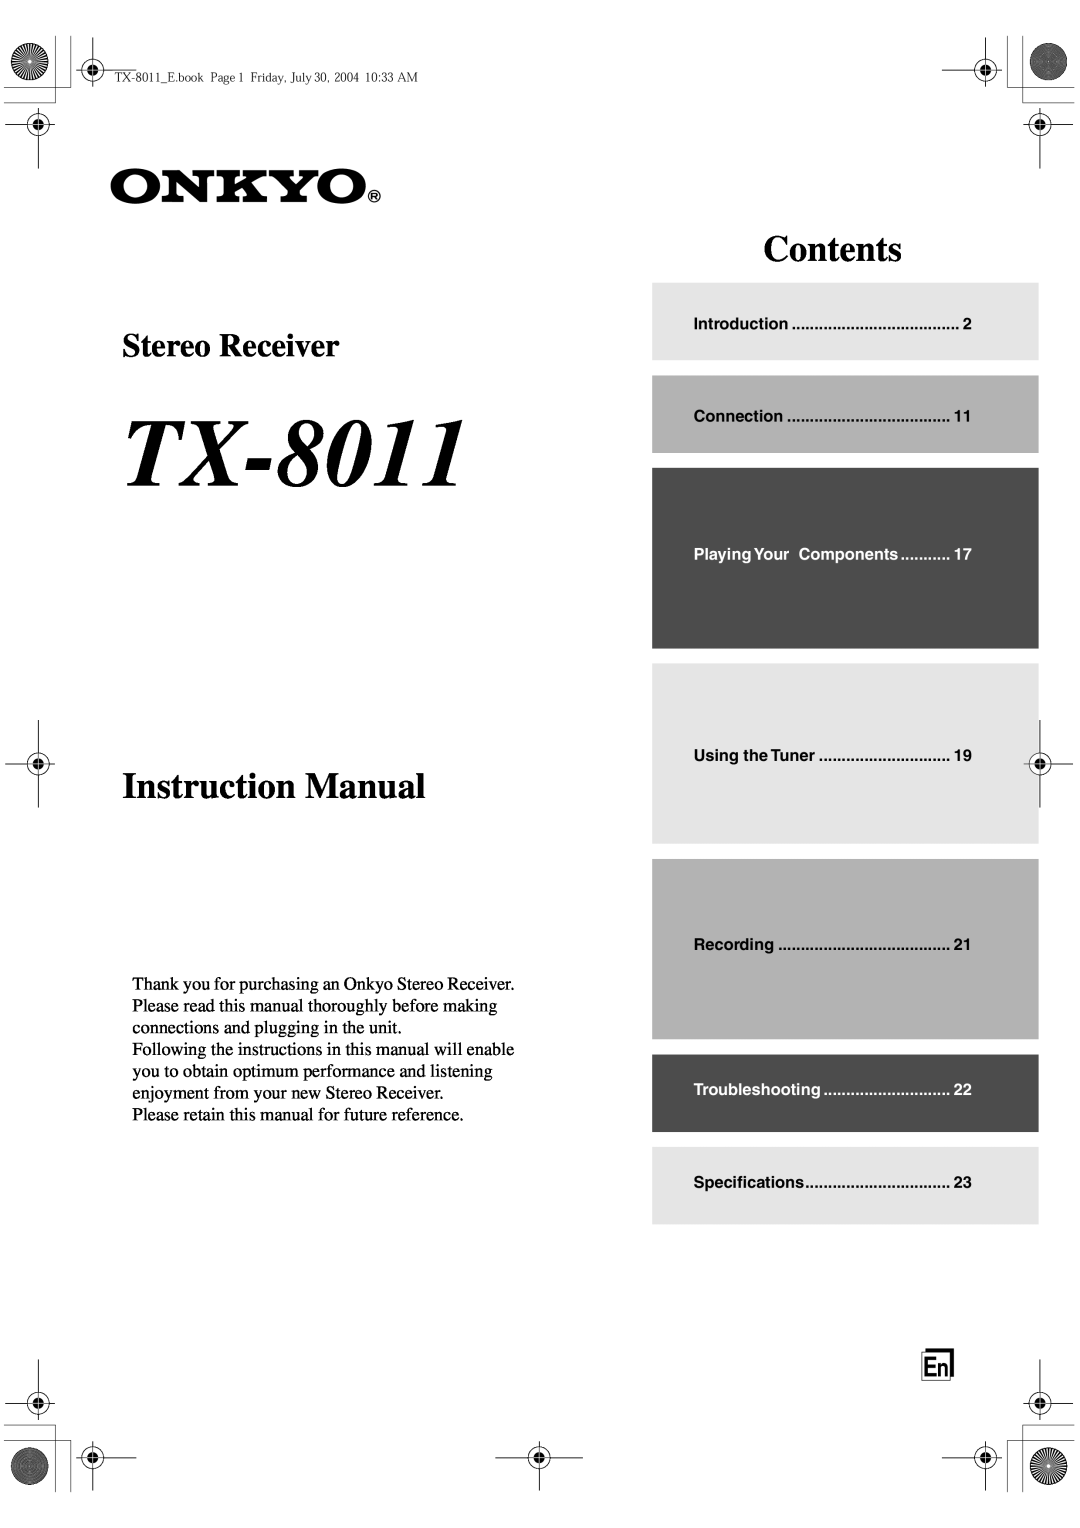 Onkyo TX-8011 instruction manual Contents, Stereo Receiver 